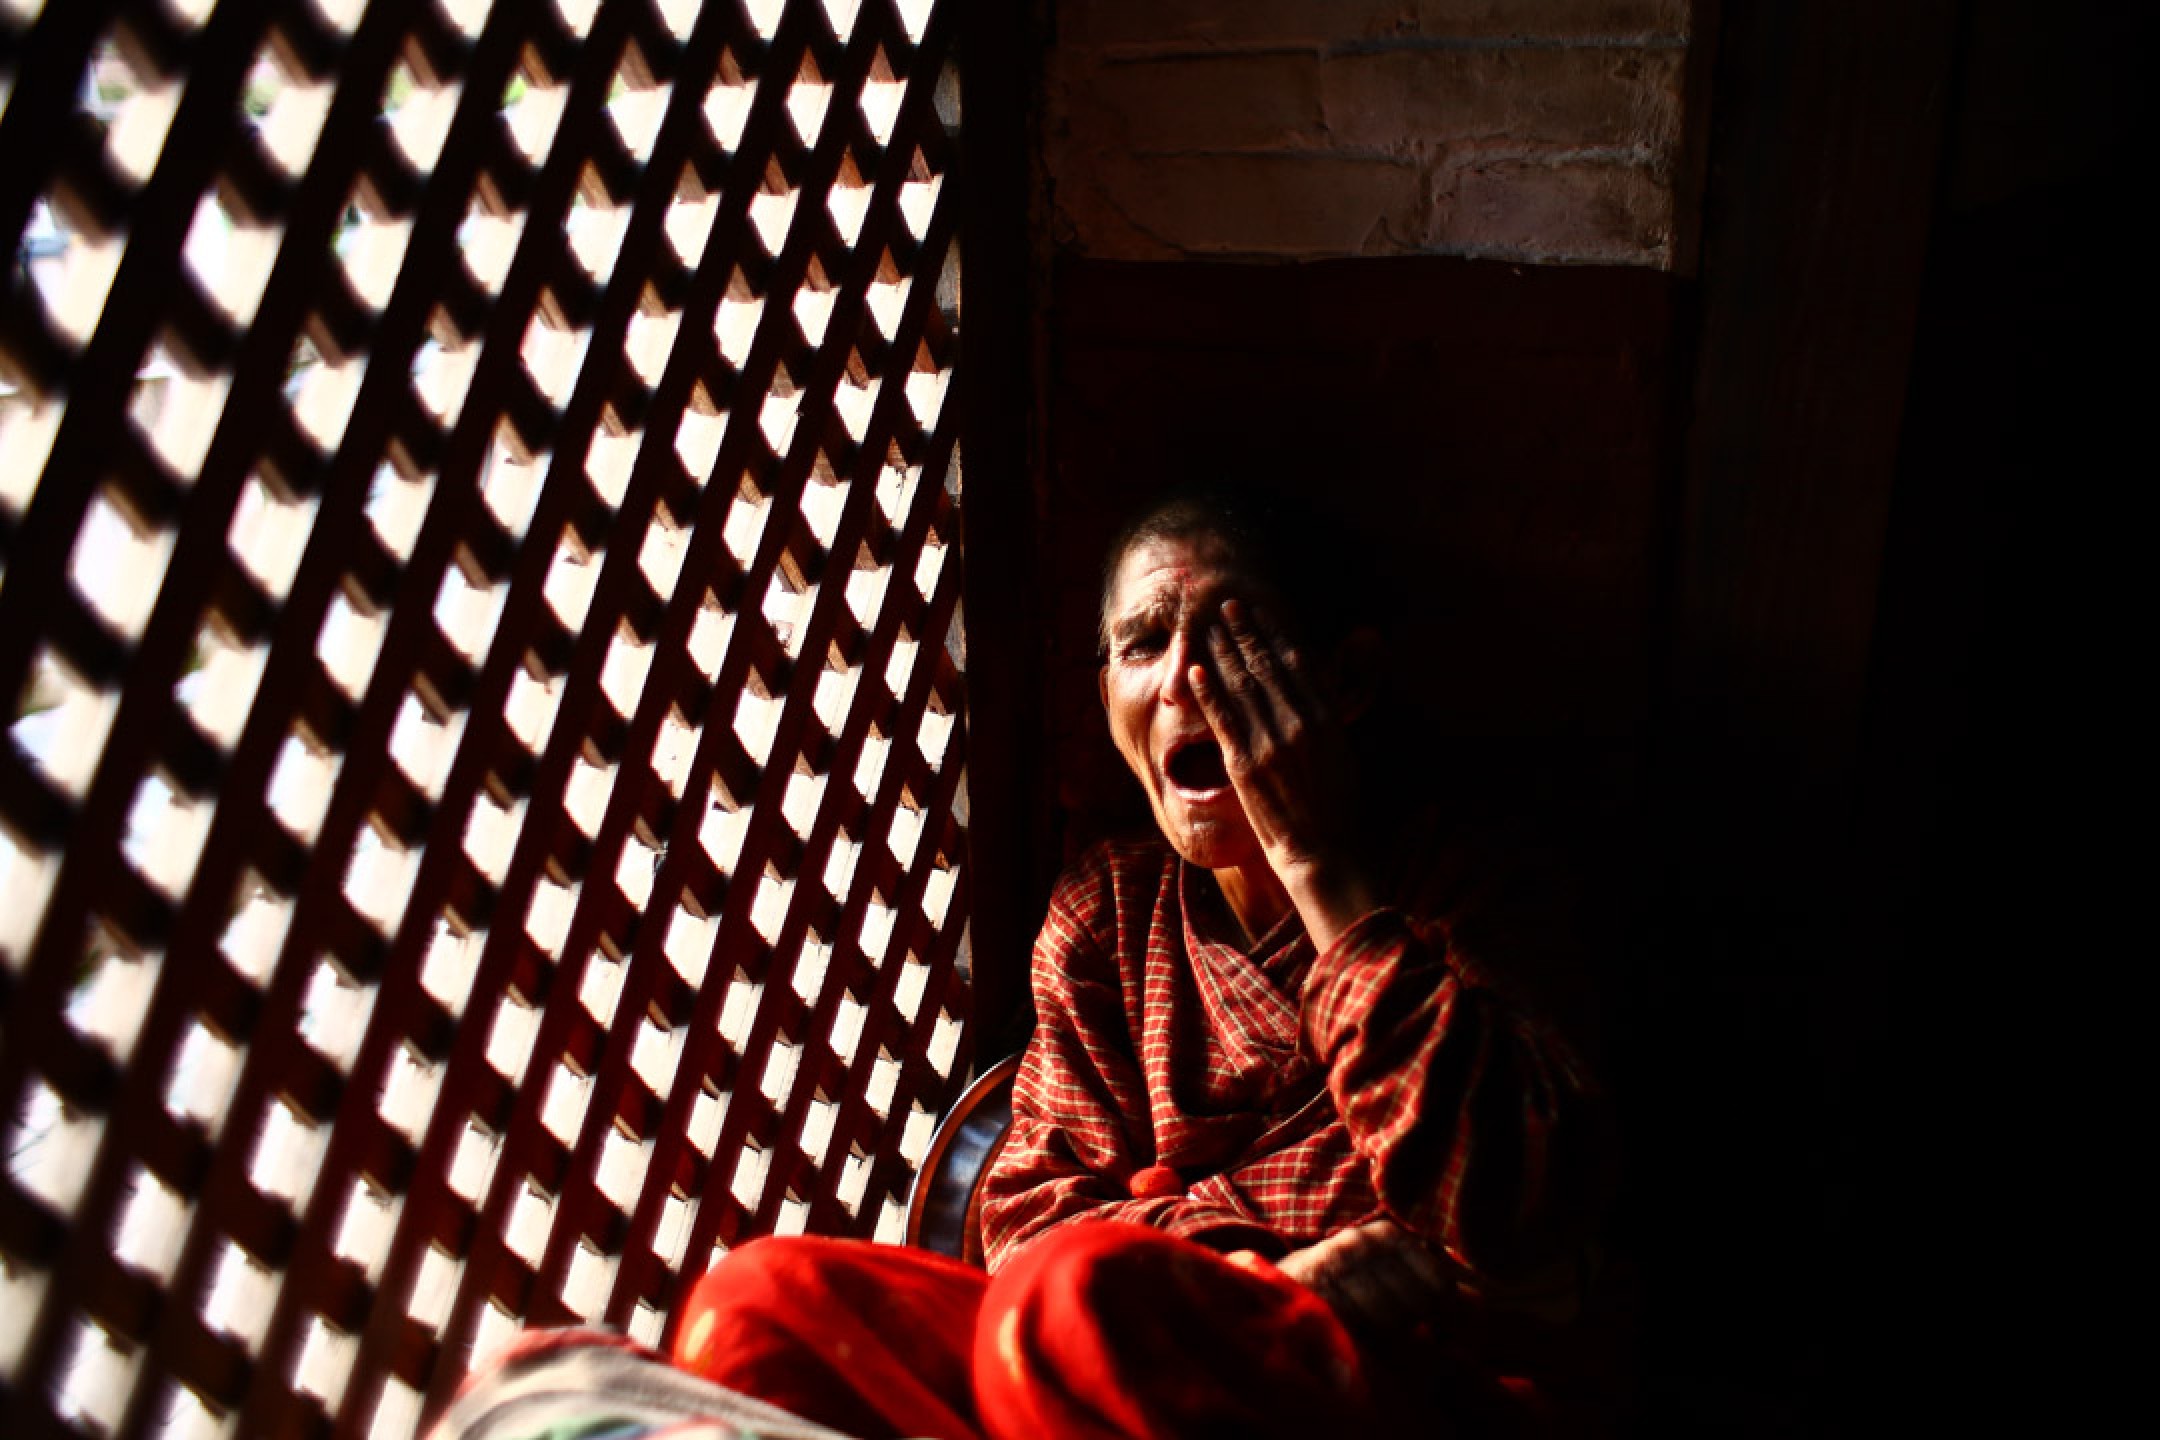 HOME FOR ELDERLY PEOPLE IN NEPAL